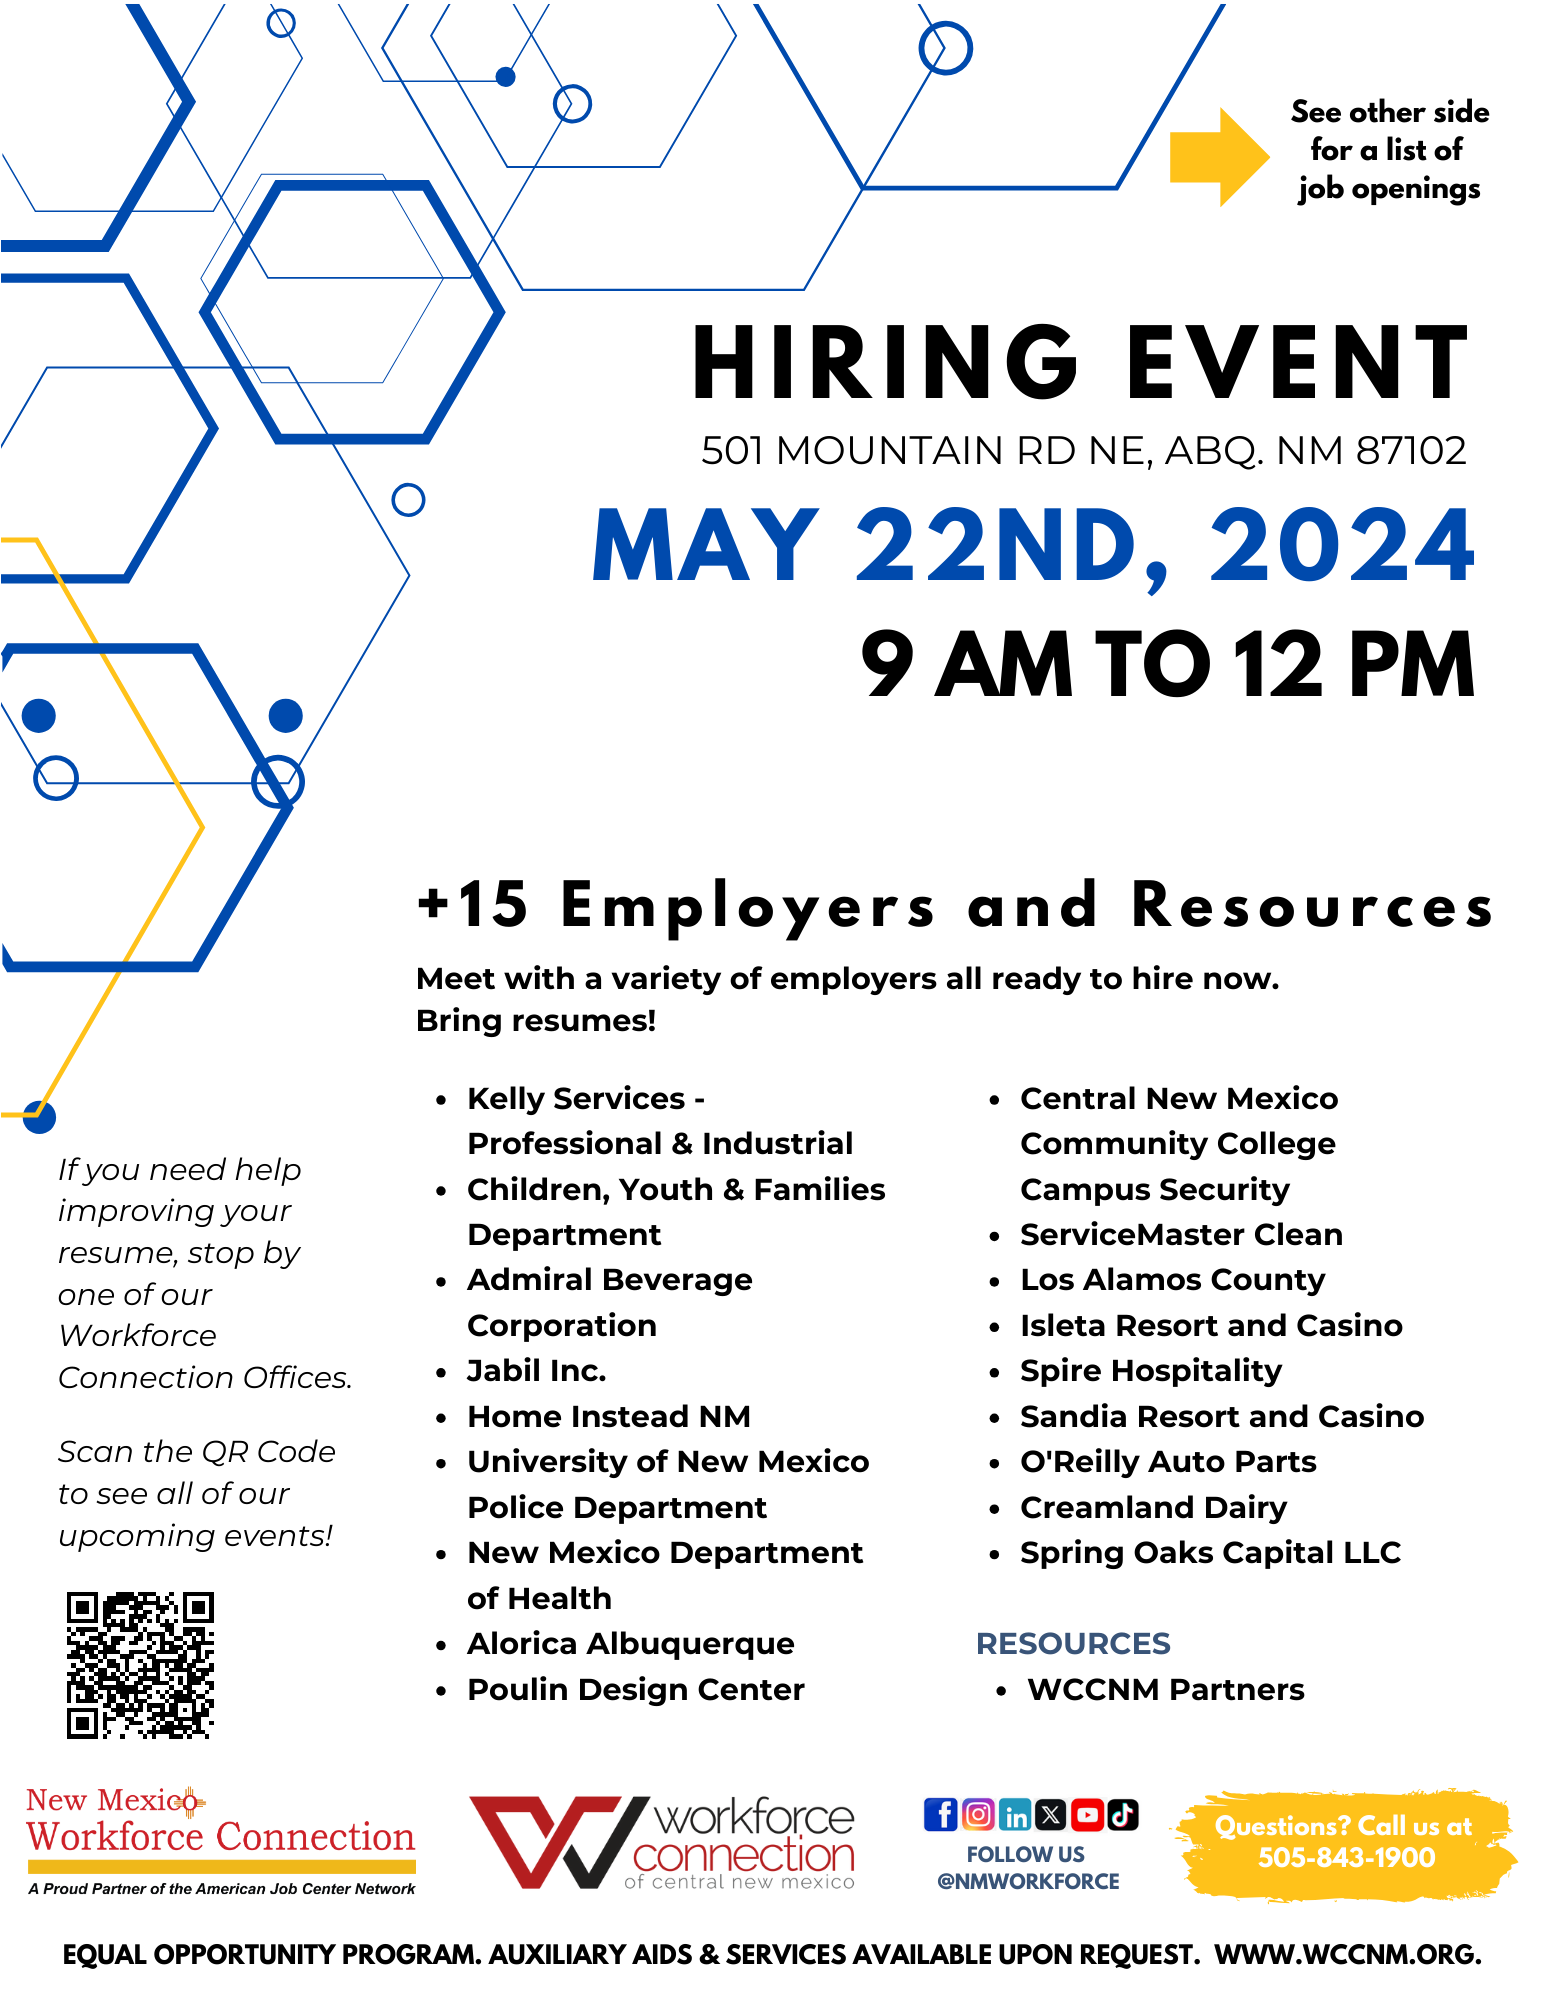 Hiring Event - May 22nd, 2024 Flyer